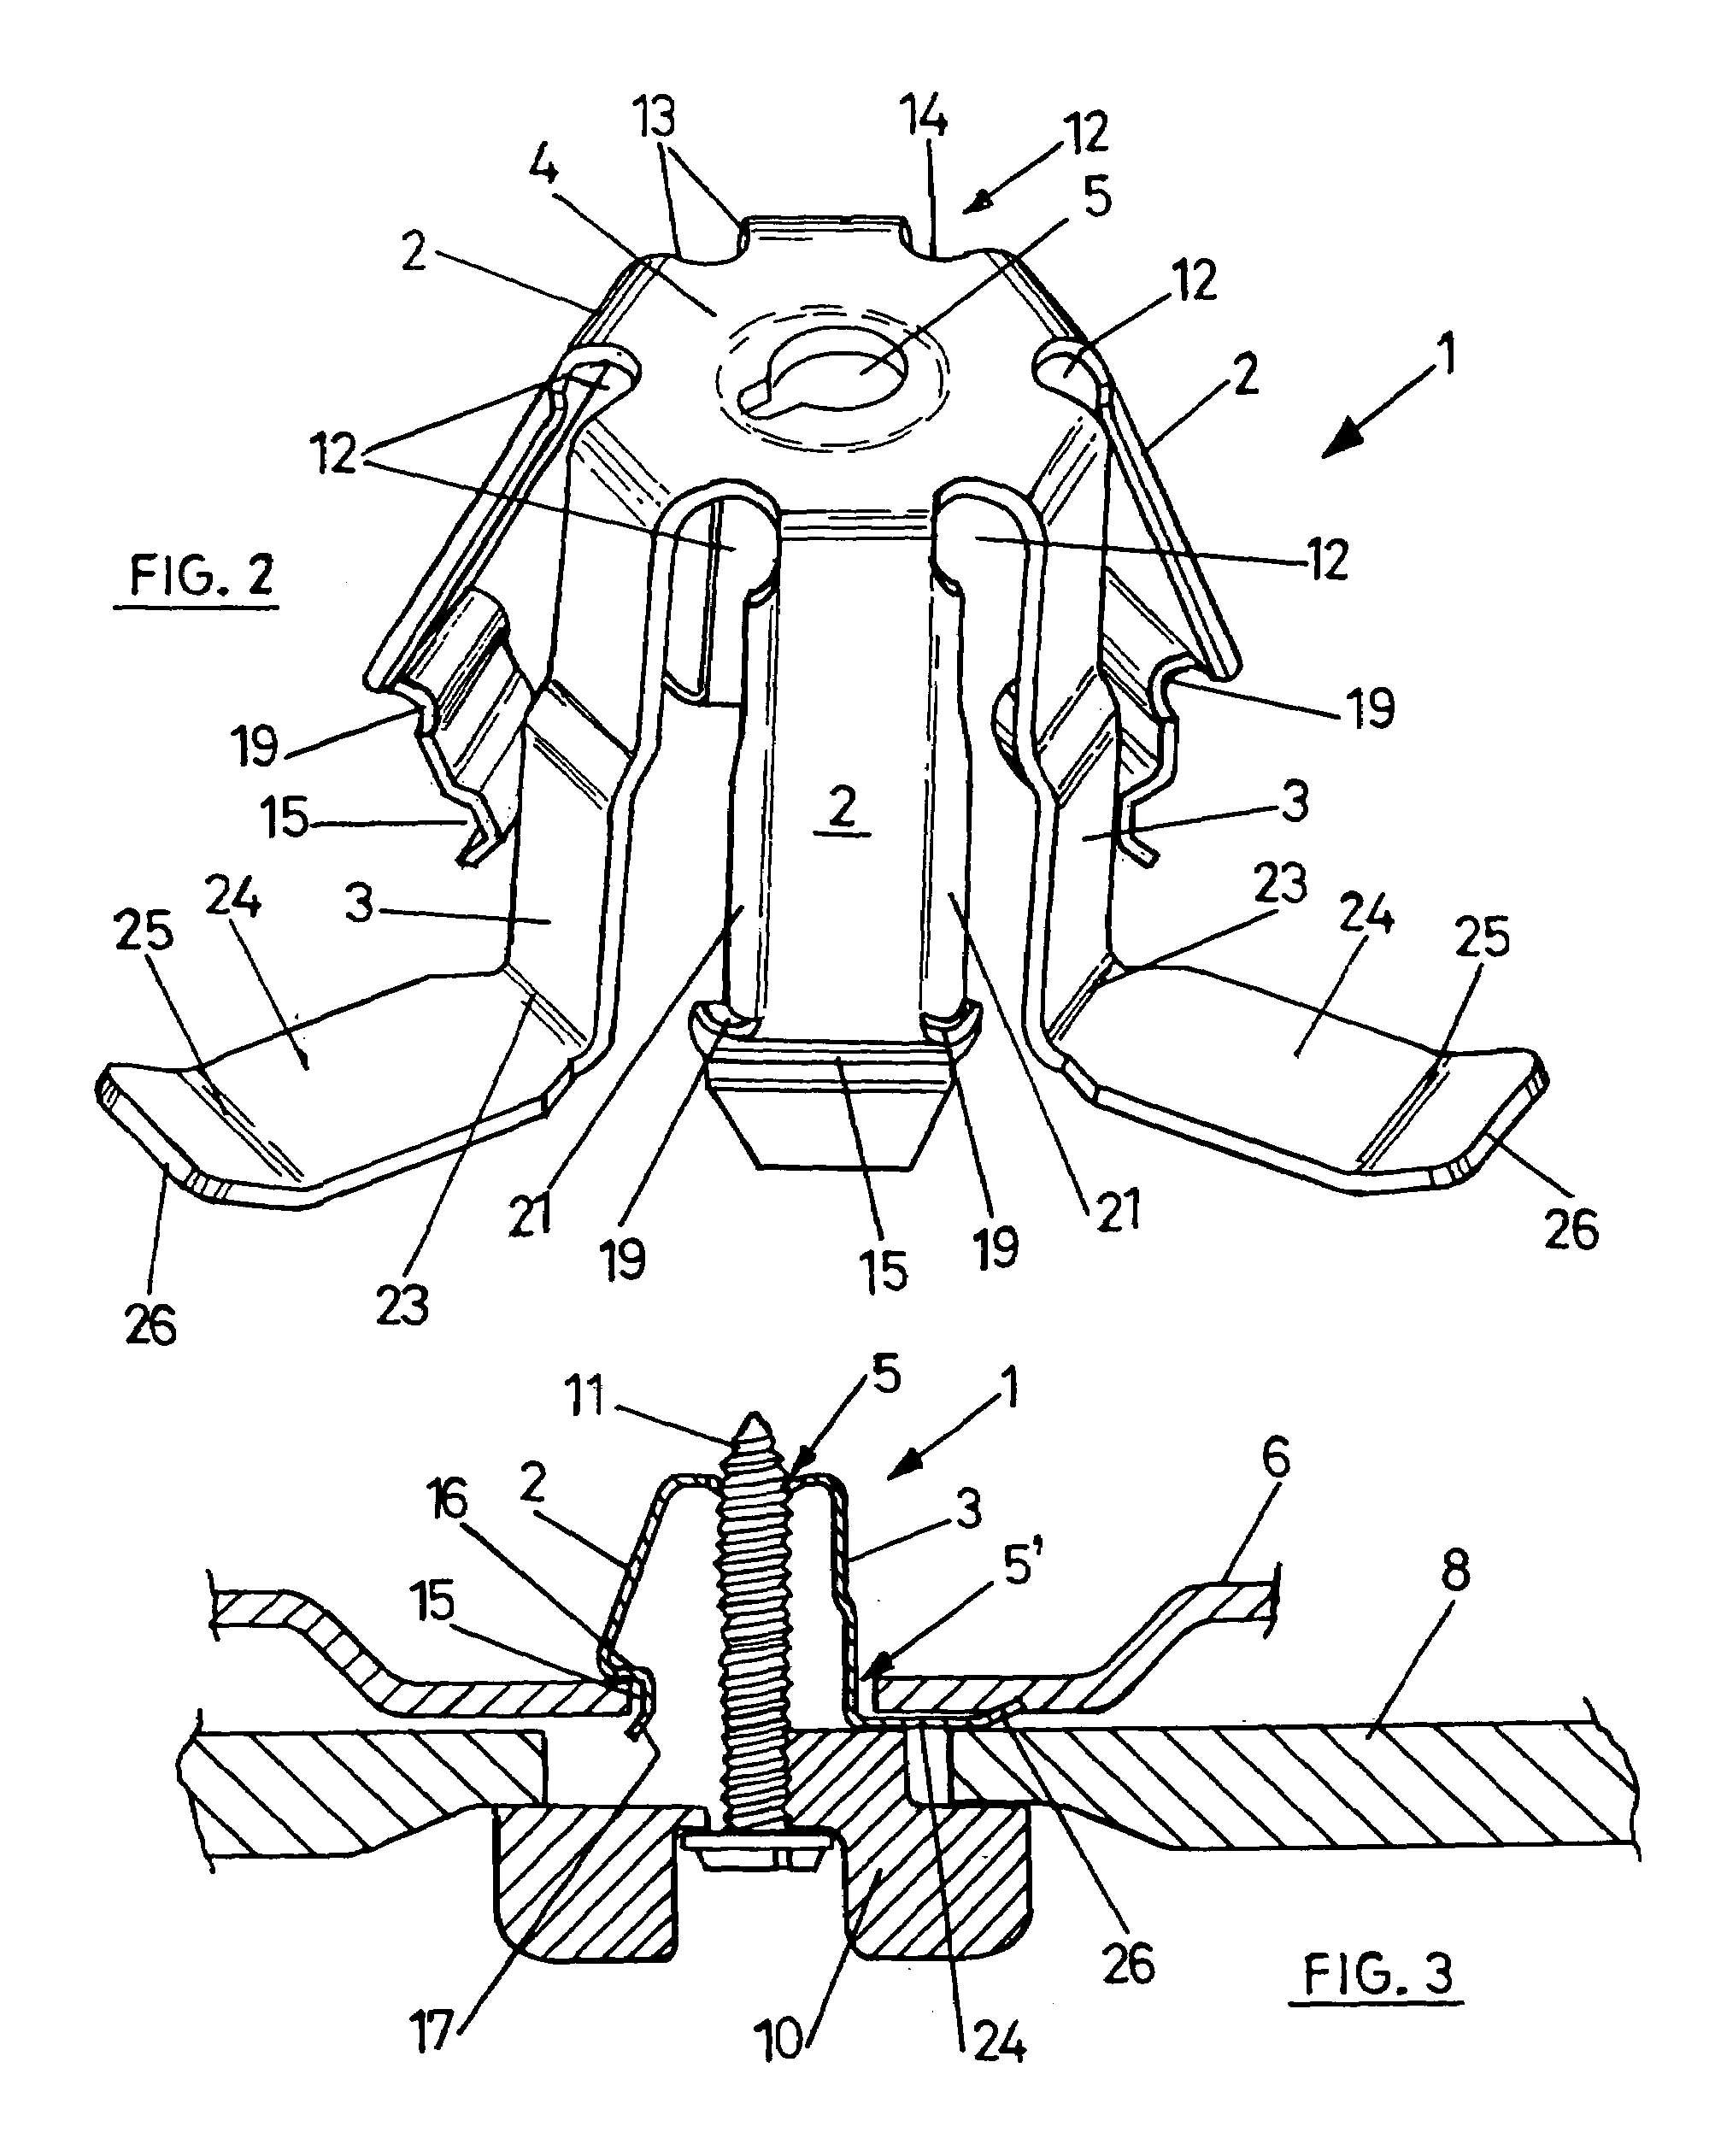 System for attaching accessories to a vehicle's bodywork using clips